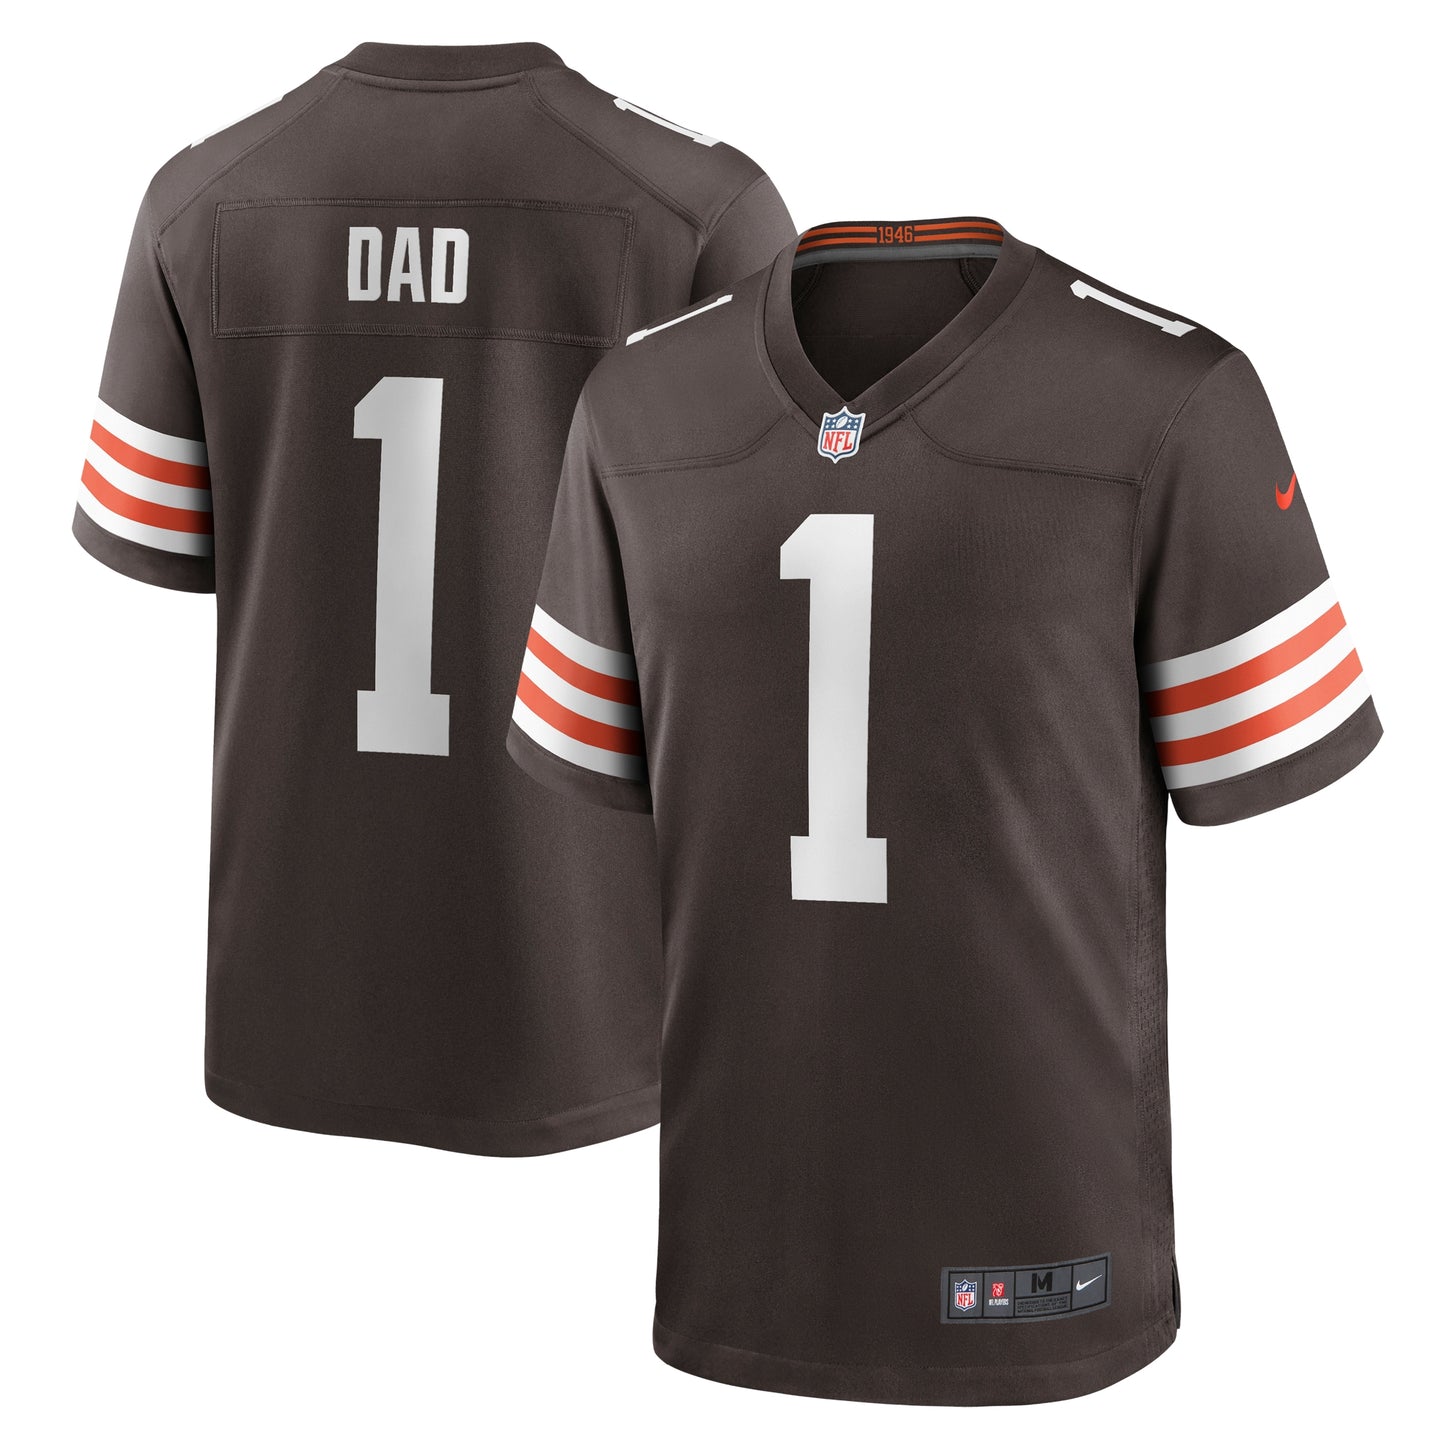 Number 1 Dad Cleveland Browns Nike Game Jersey - Brown